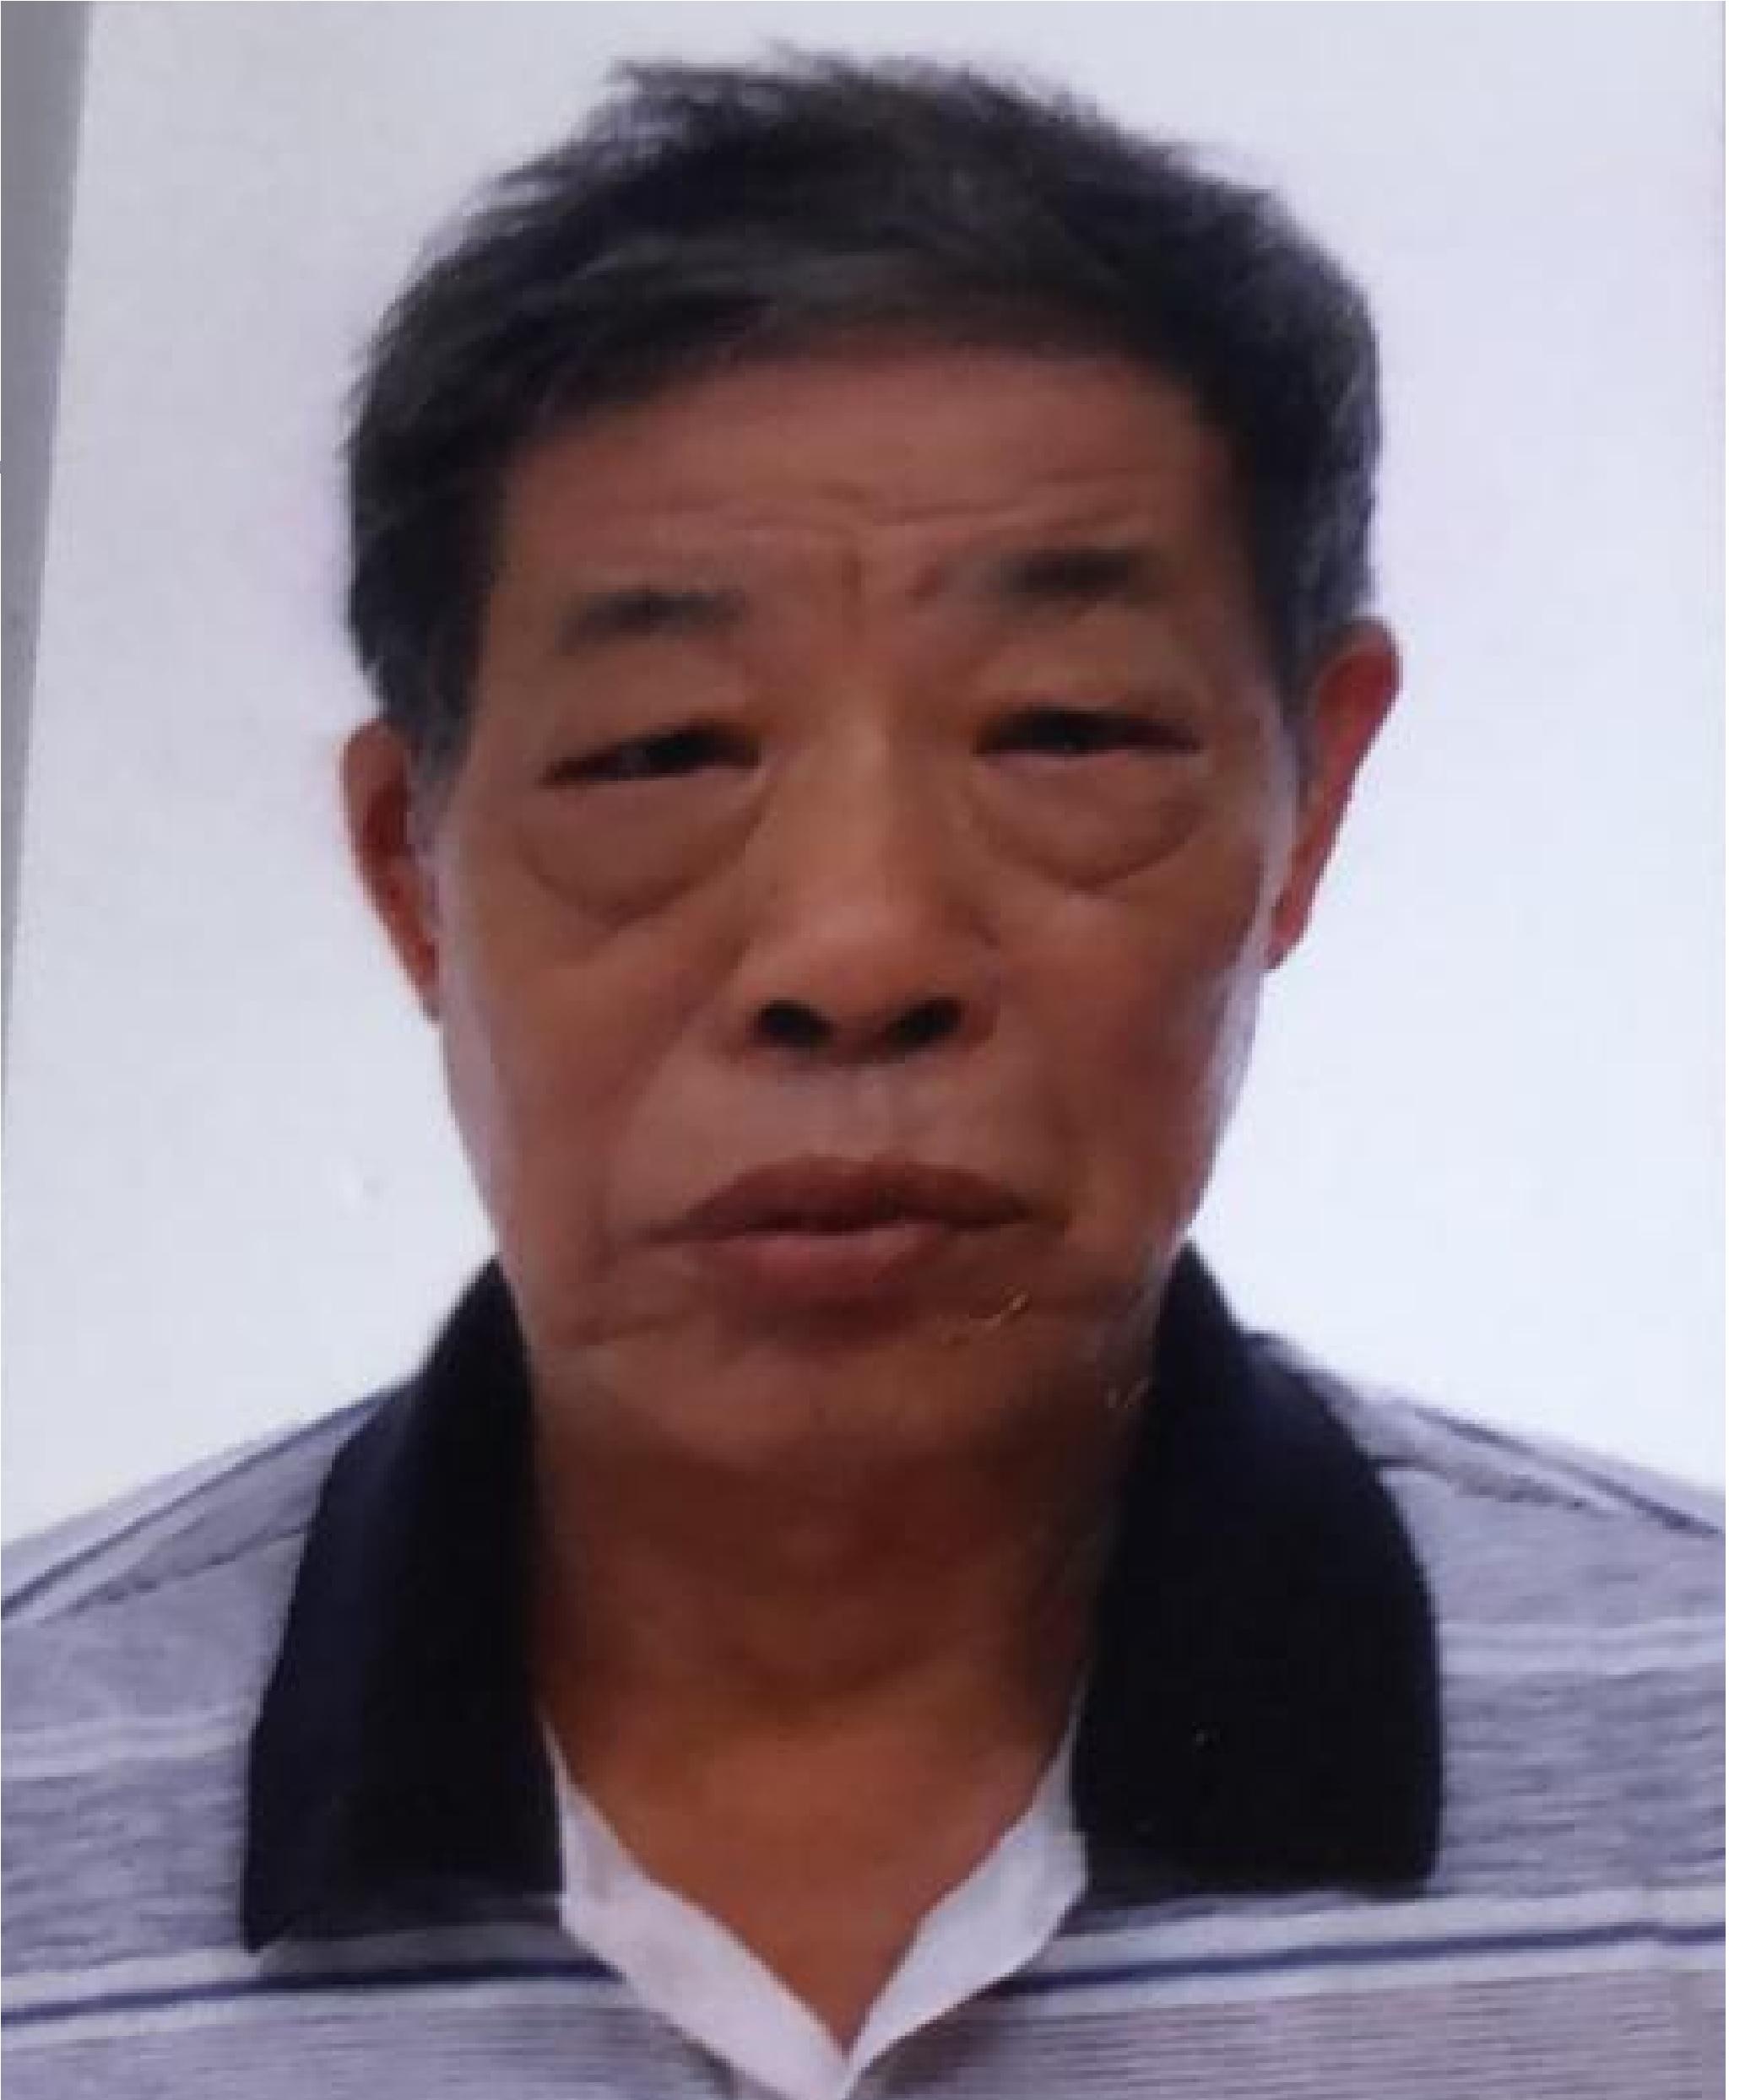 Chan Chun-ping, aged 74, is about 1.6 metres tall, 75 kilograms in weight and of medium build. He has a round face with yellow complexion and white grey short hair. He was last seen wearing a light grey long sleeve shirt, dark long trousers, sport shoes and carrying an orange backpack.